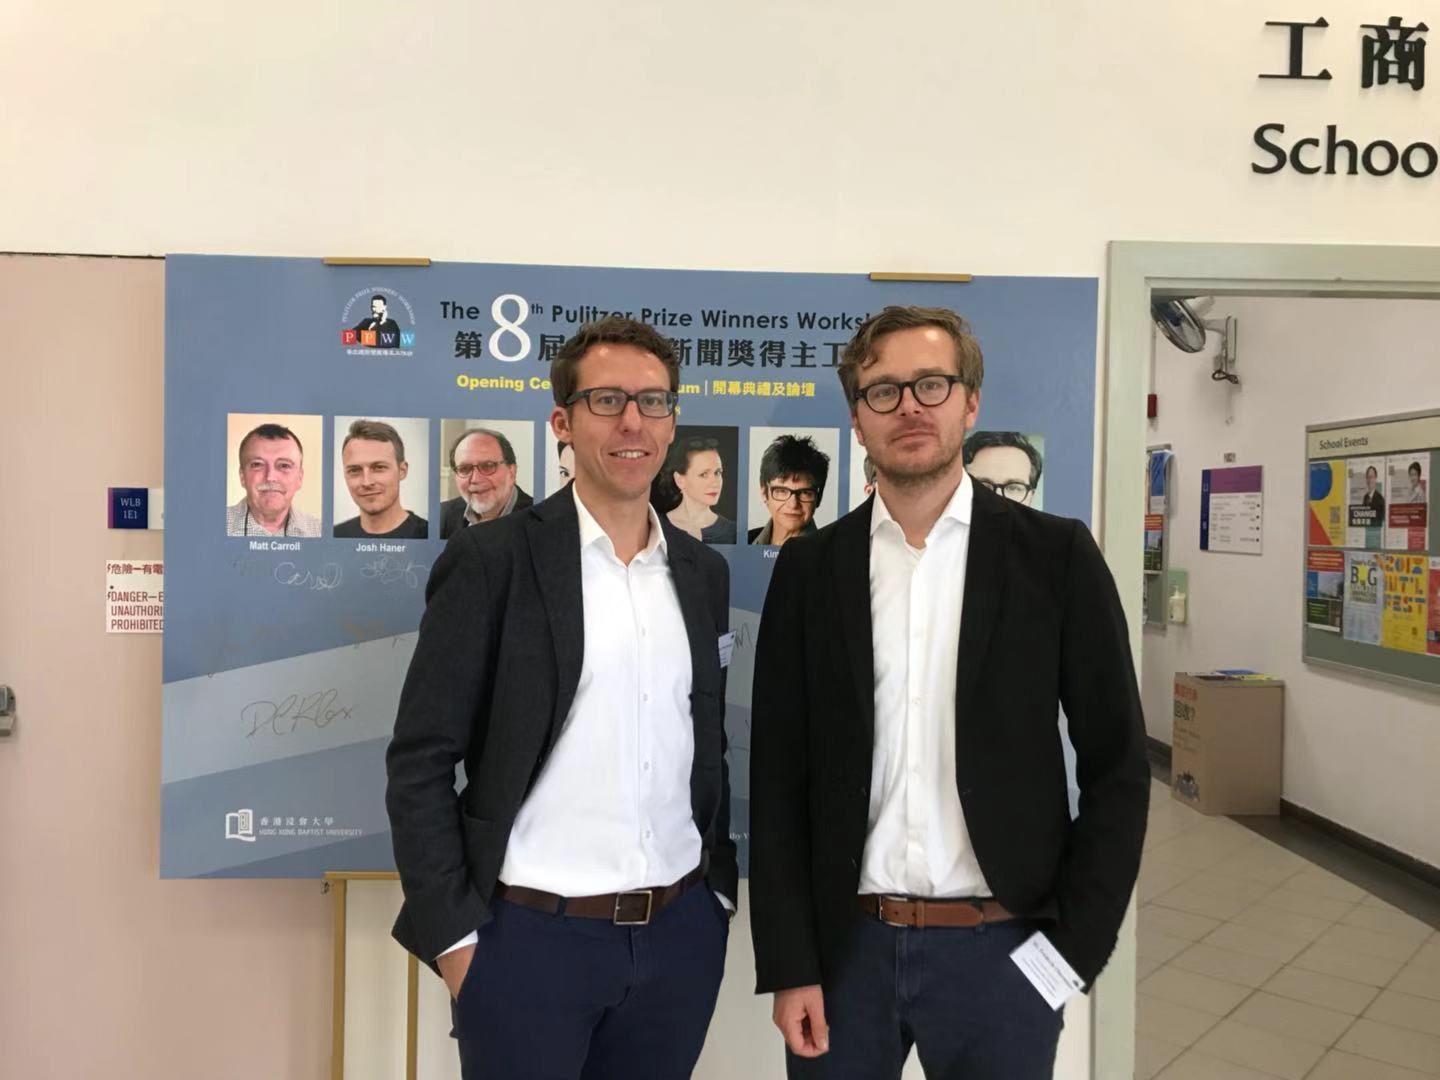 PARTNERS. Frederik Obermaier (right) and Bastian Obermayer (left) attend the Pulitzer Prize Workshop in Hong Kong in October 2018. Photo courtesy of School of Communication, Hong Kong Baptist University 